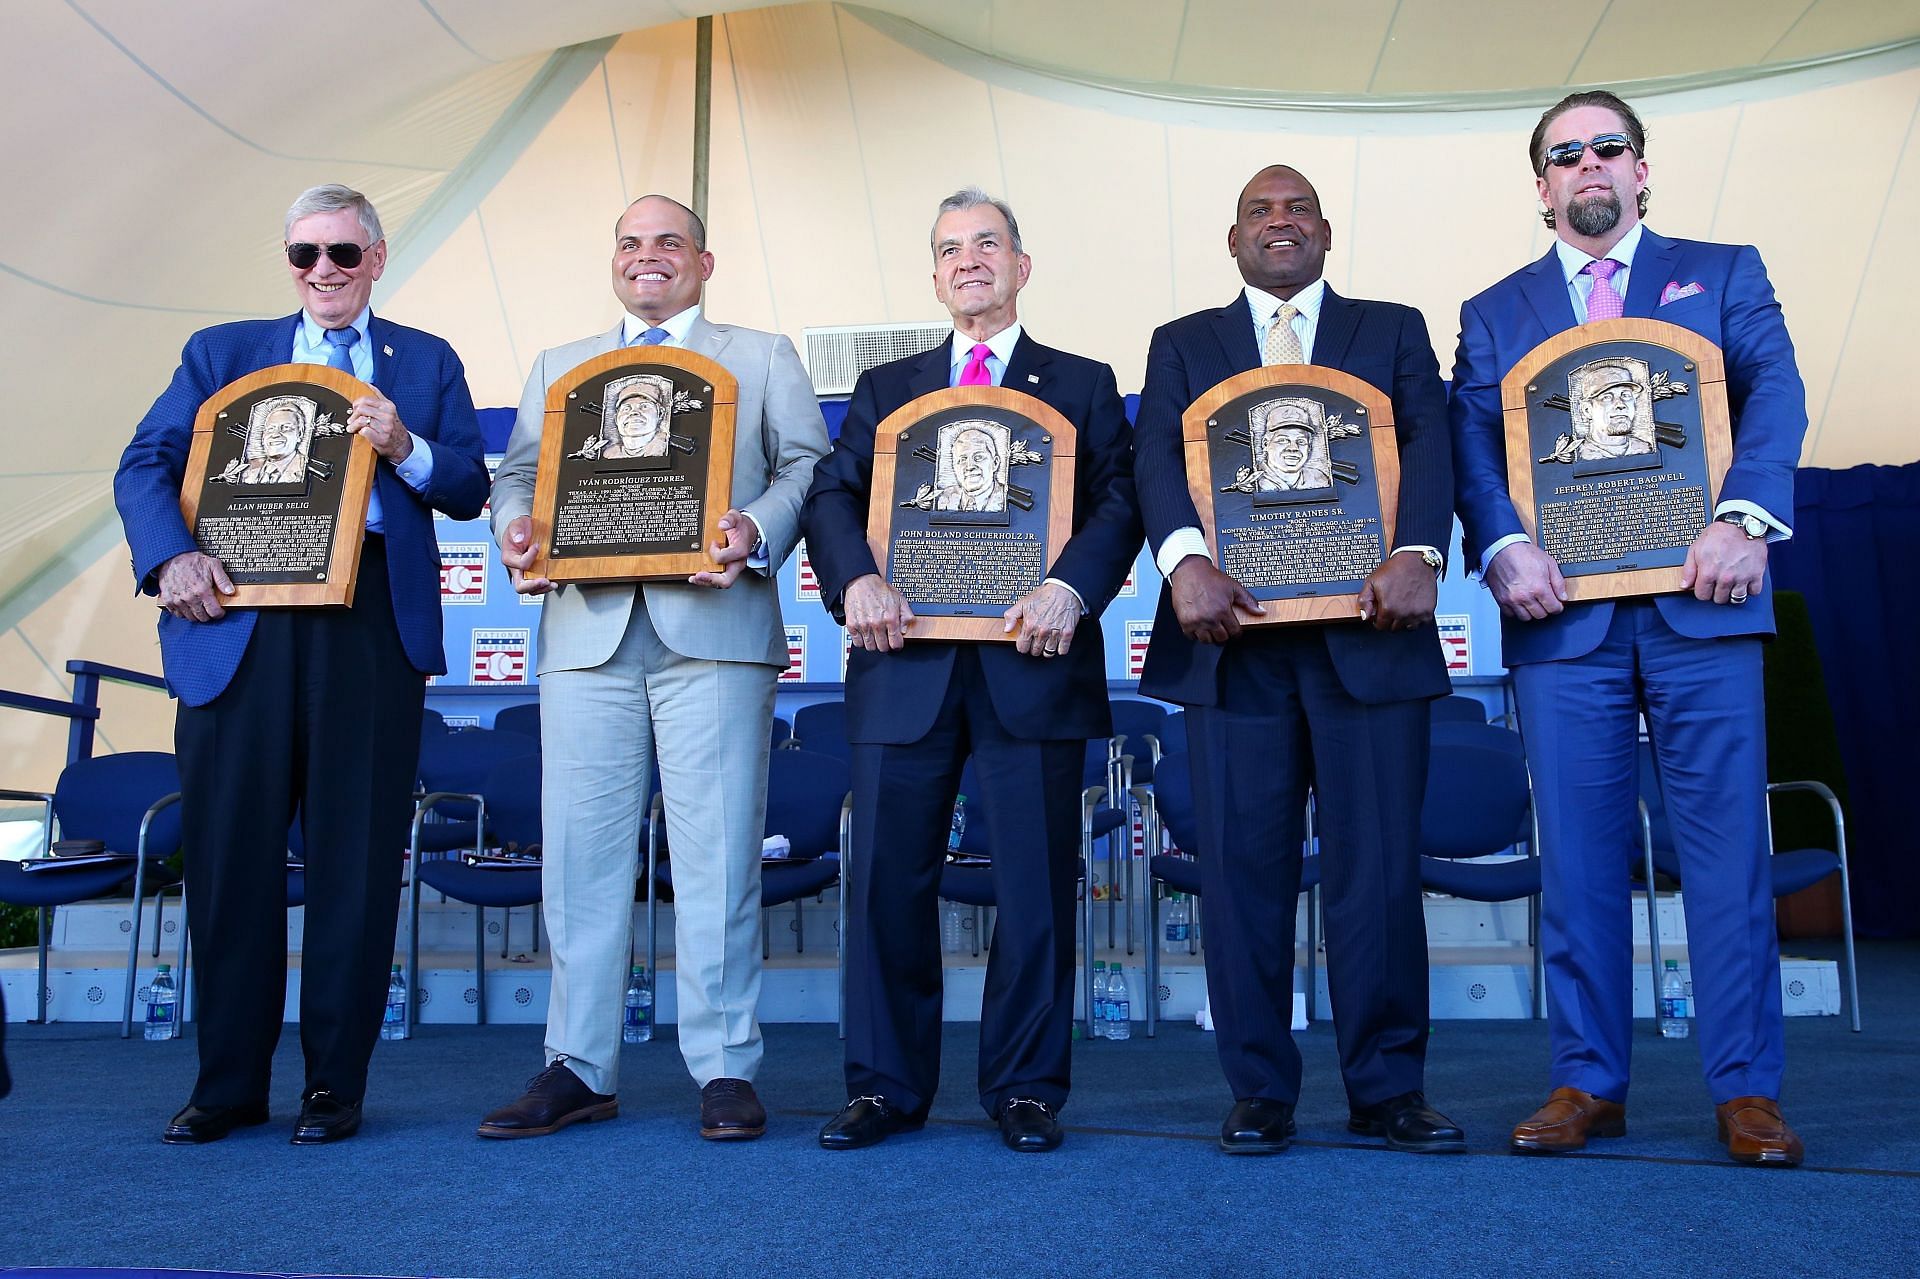 The Major League Baseball Hall of Fame Induction Ceremony takes place every year in Cooperstown, New York. This year, Boston Red Sox legend David Ortiz